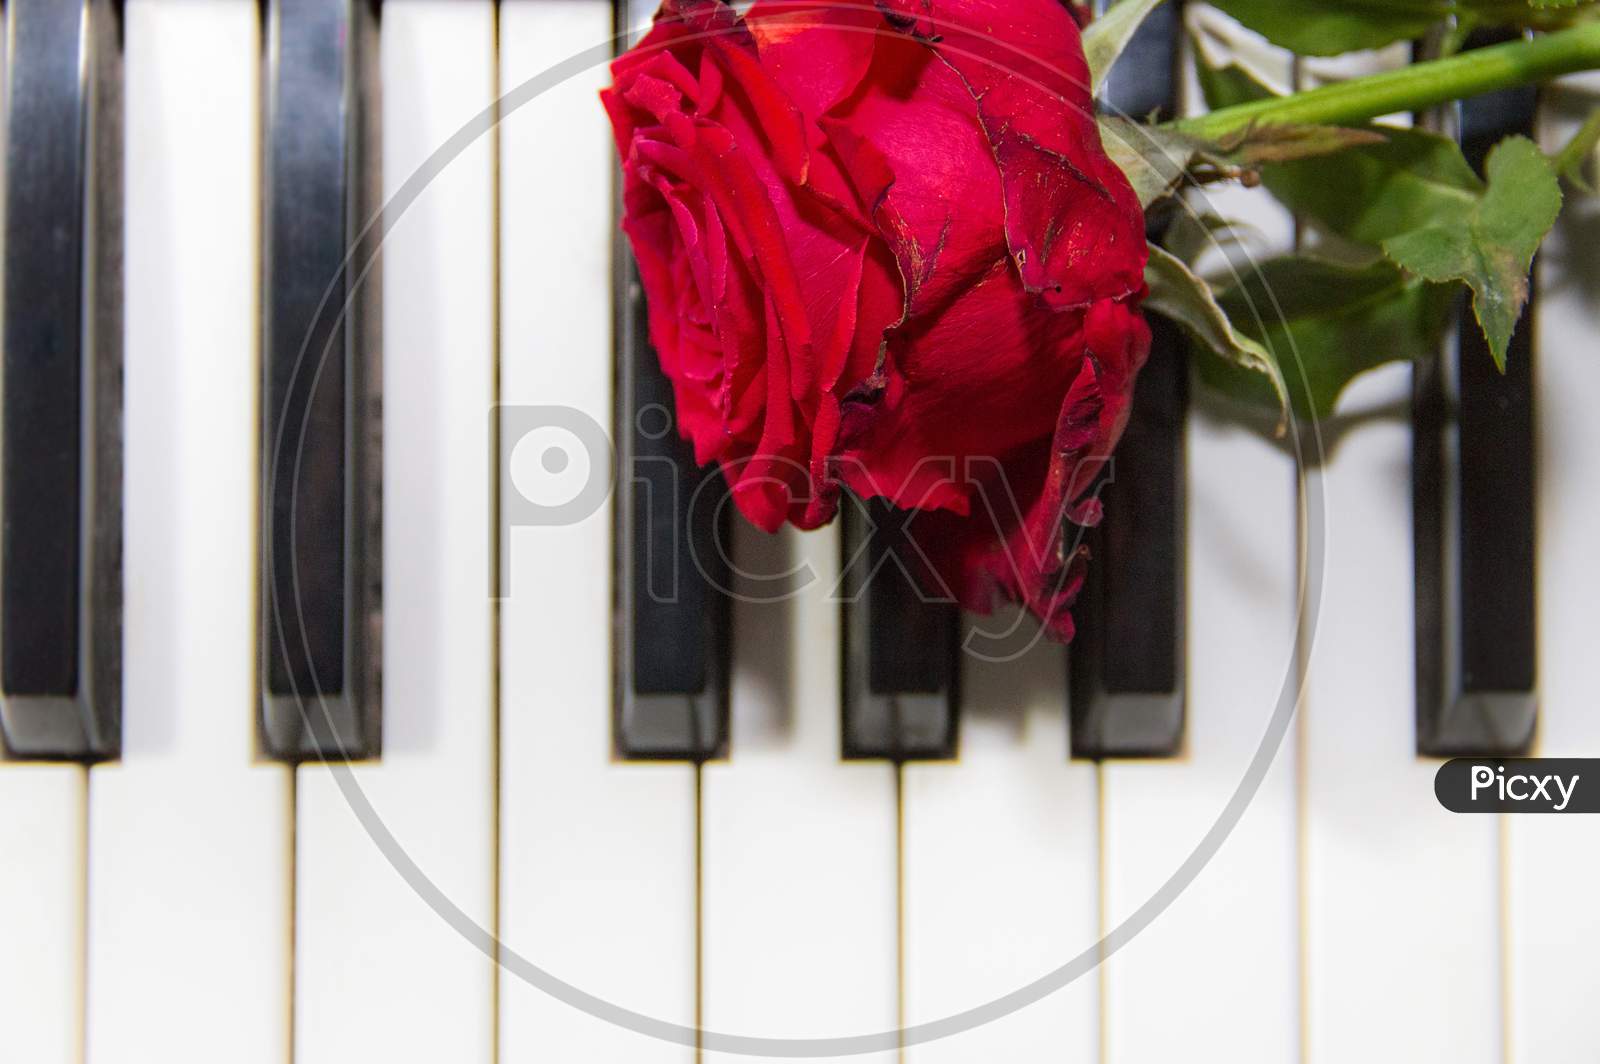 Background Of Piano Keys With A Red Rose